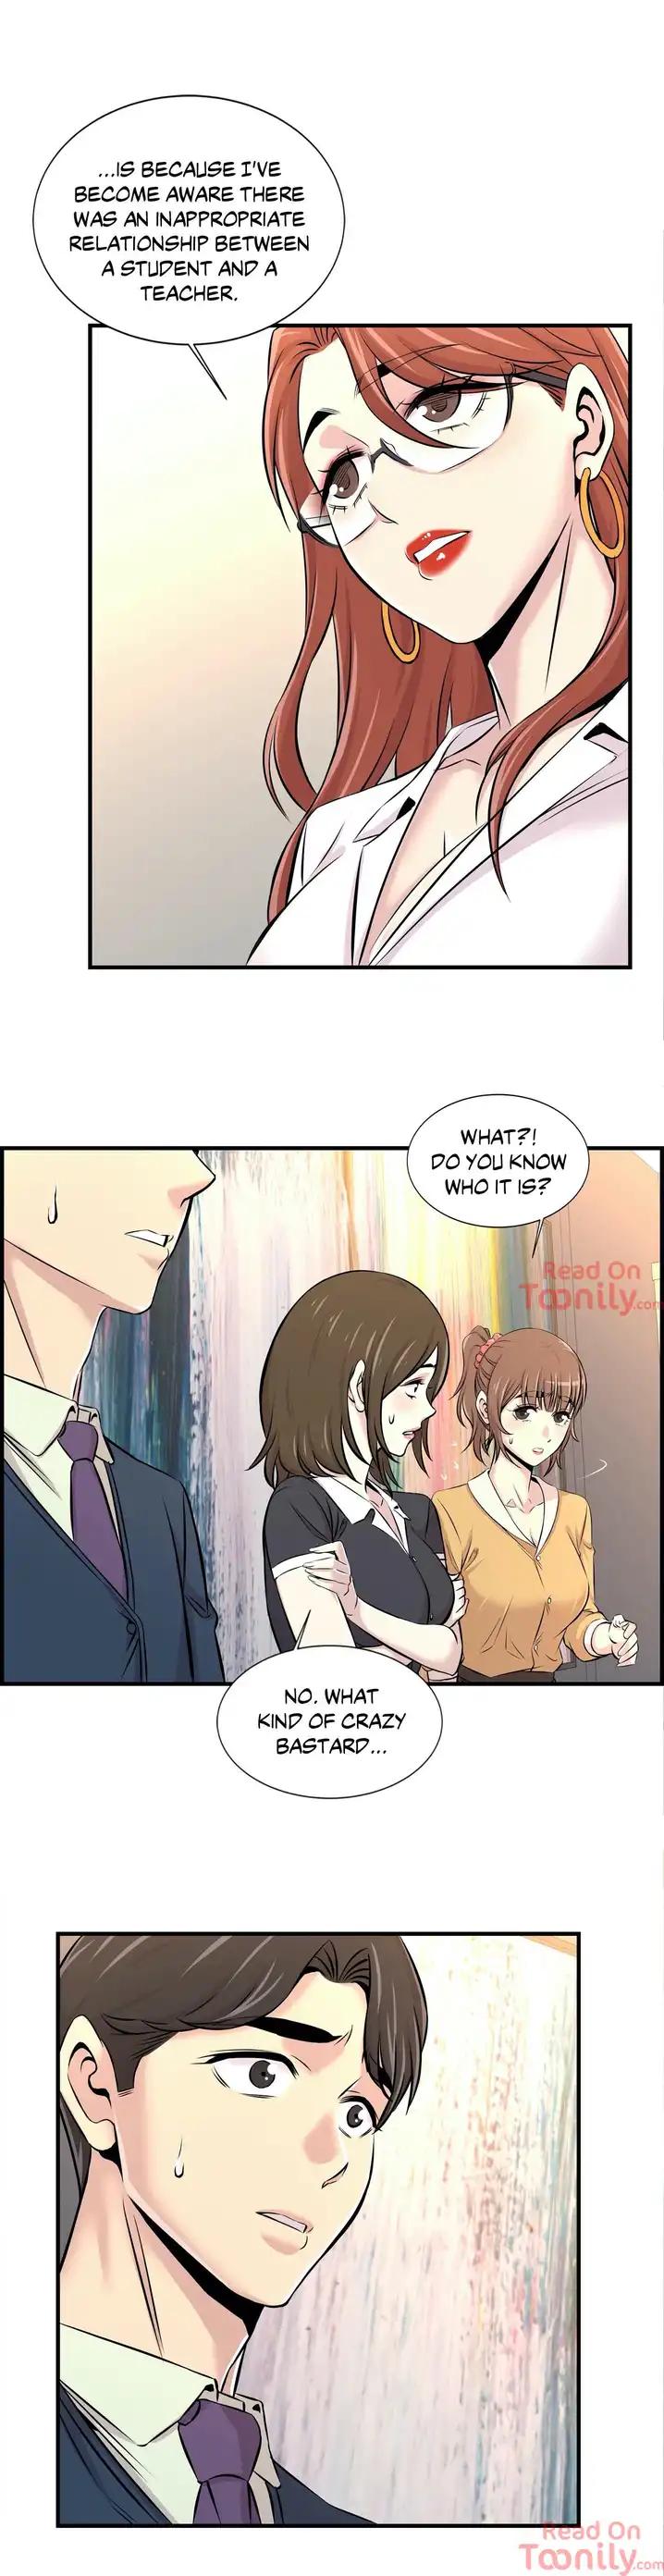 Cram School Scandal - Chapter 13 Page 11